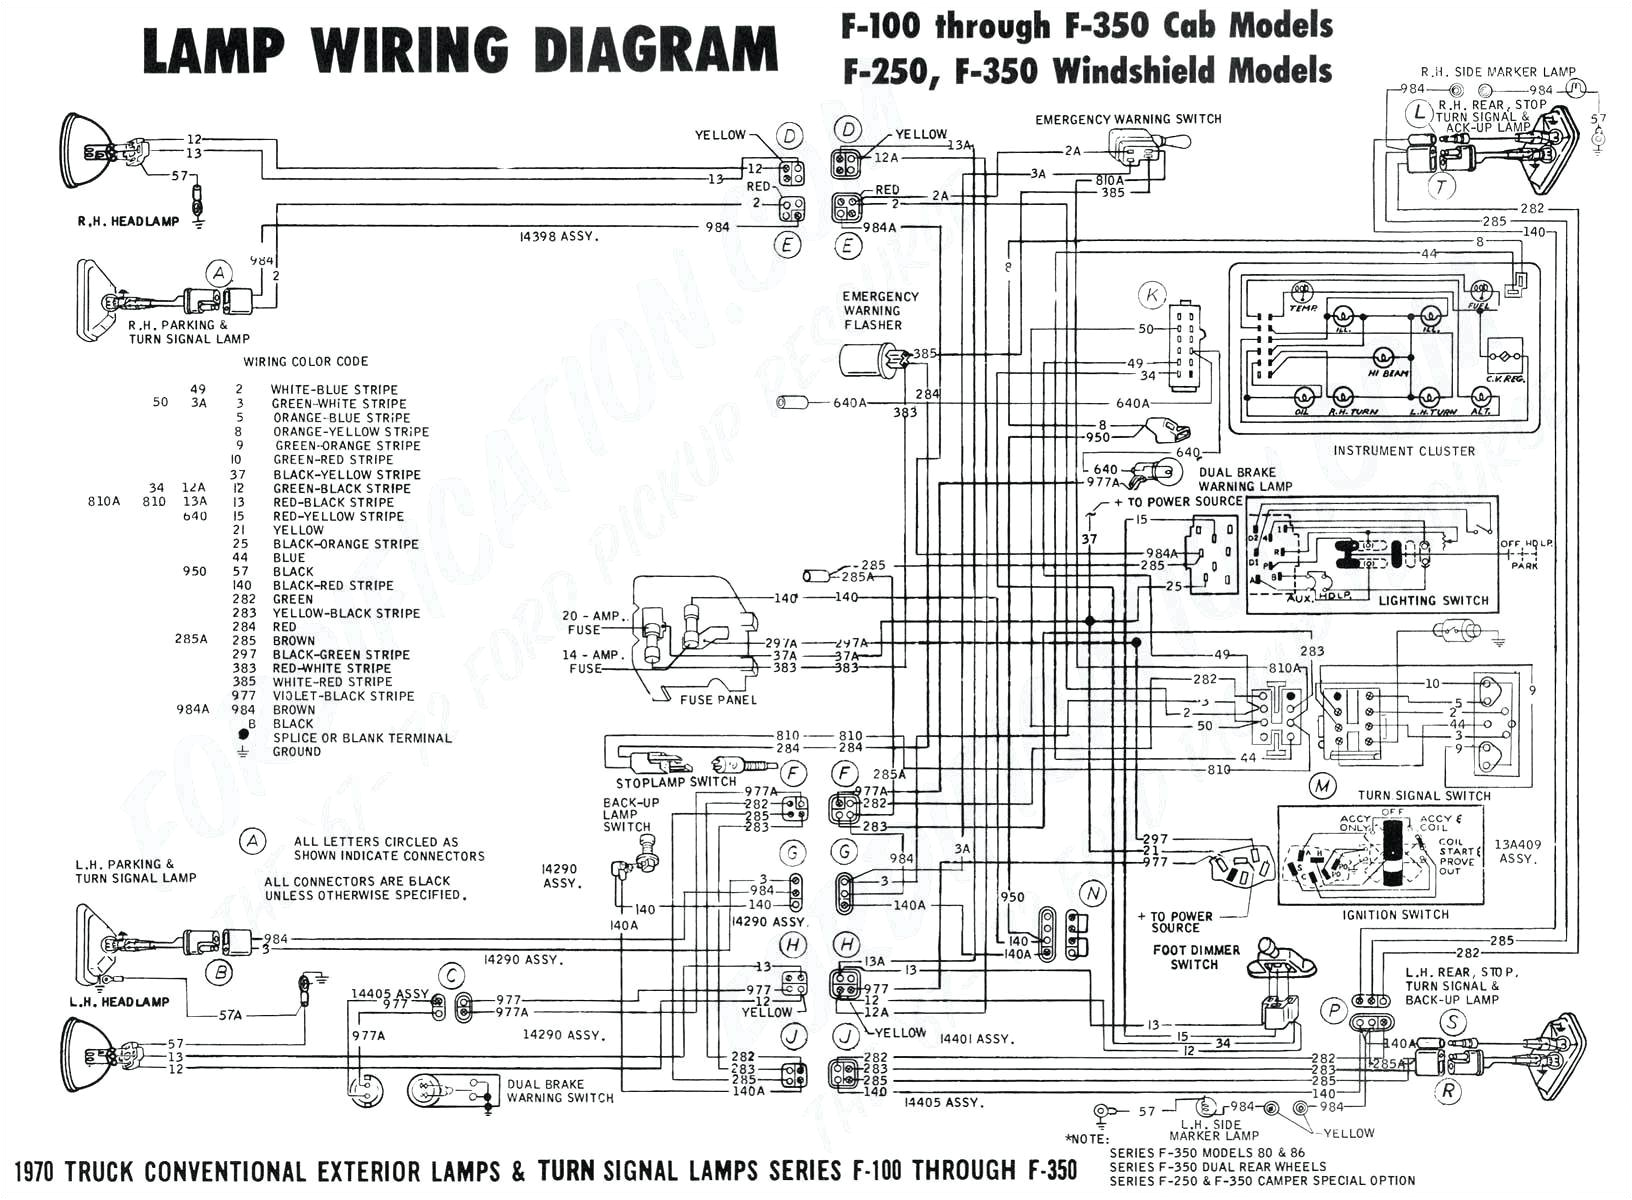 electrical wiring diagram books electrical wiring diagram ebook wiring diagram home of electrical wiring diagram books jpg